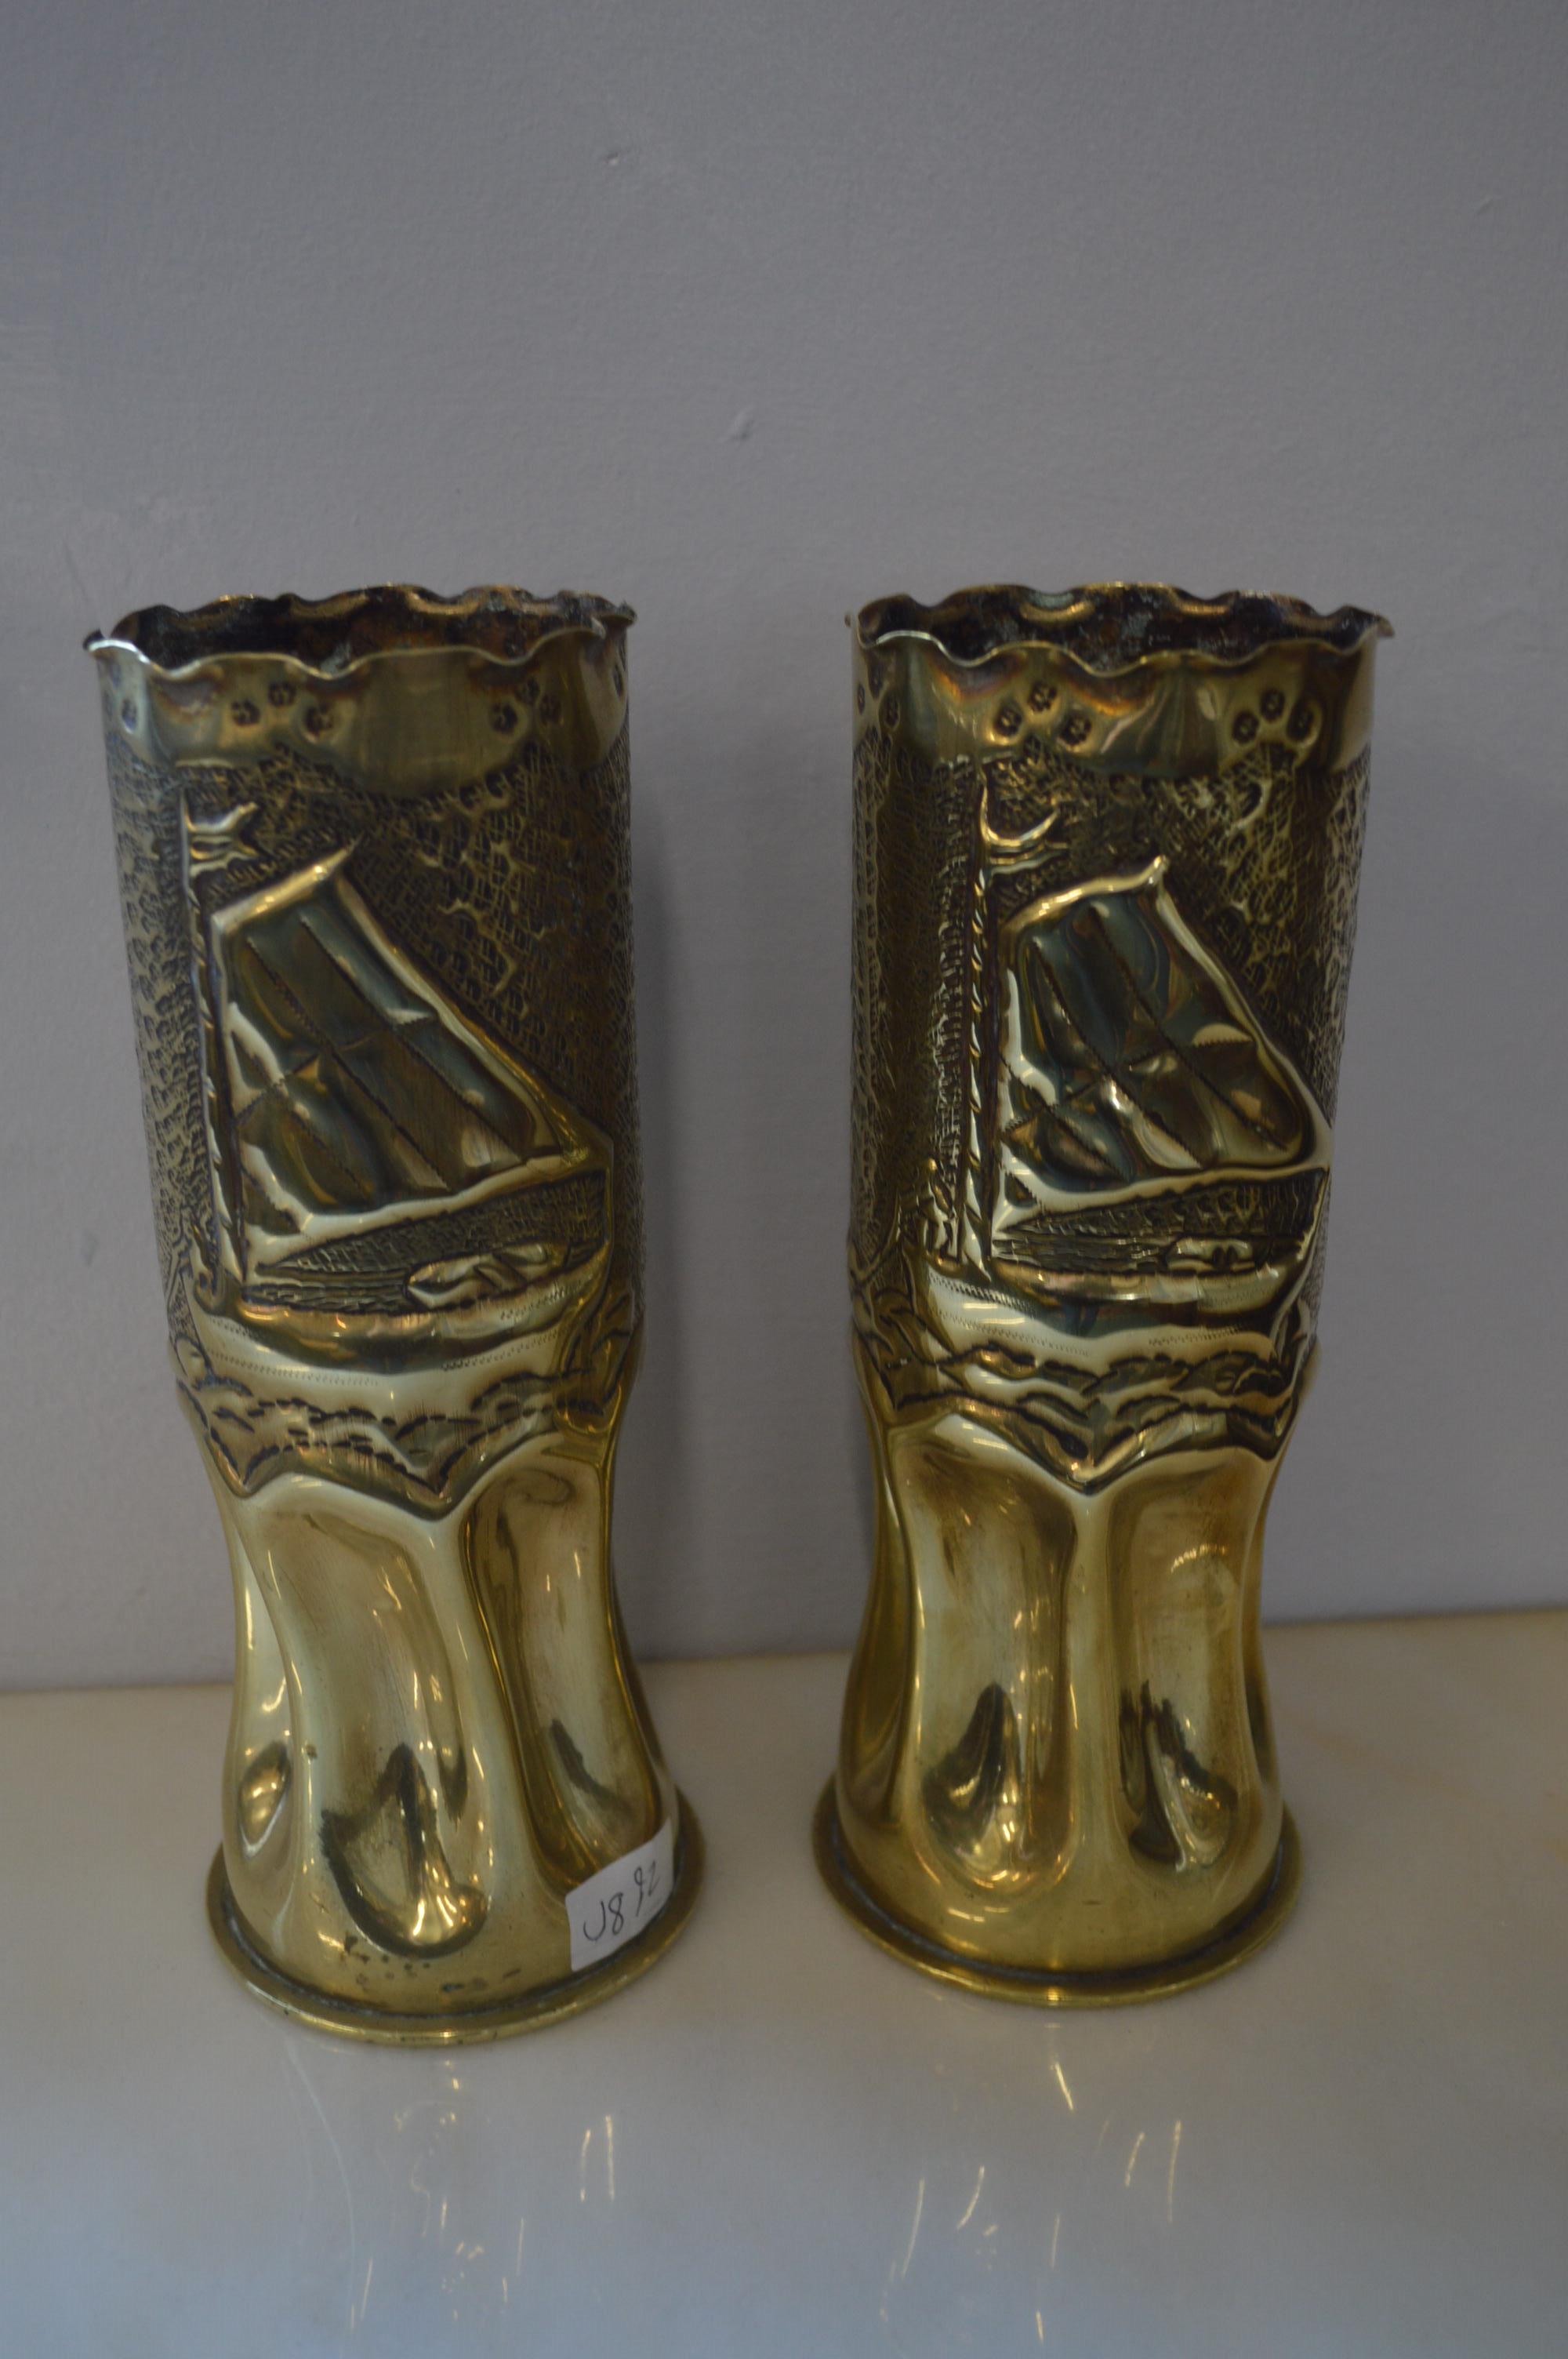 Pair of Trench Art Shell Cases - Image 3 of 3